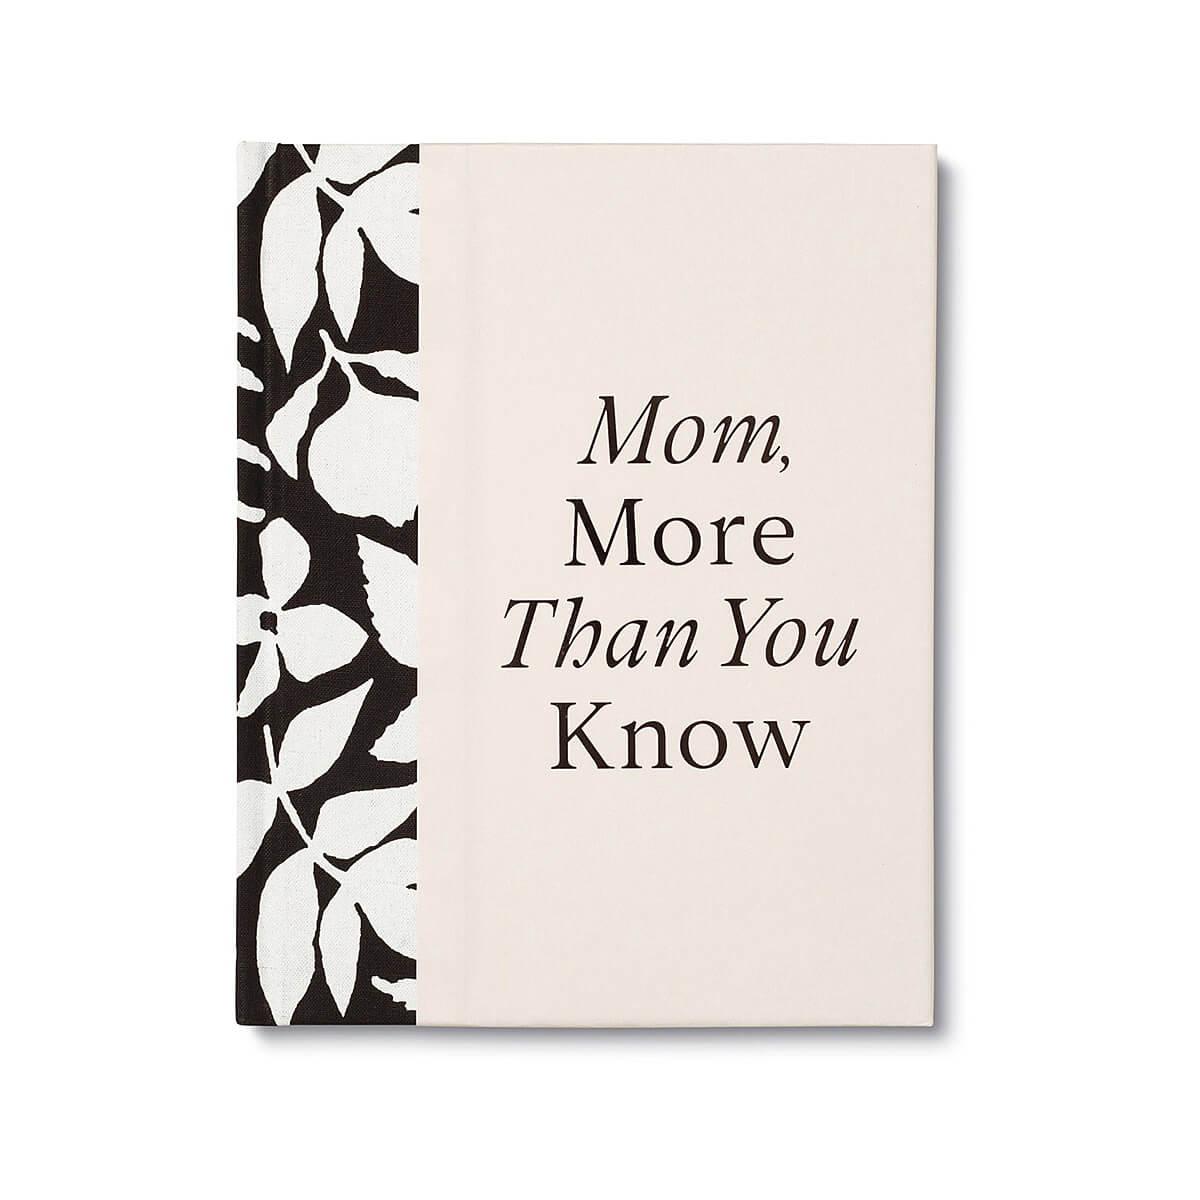  Mom, More Thank You Know Book